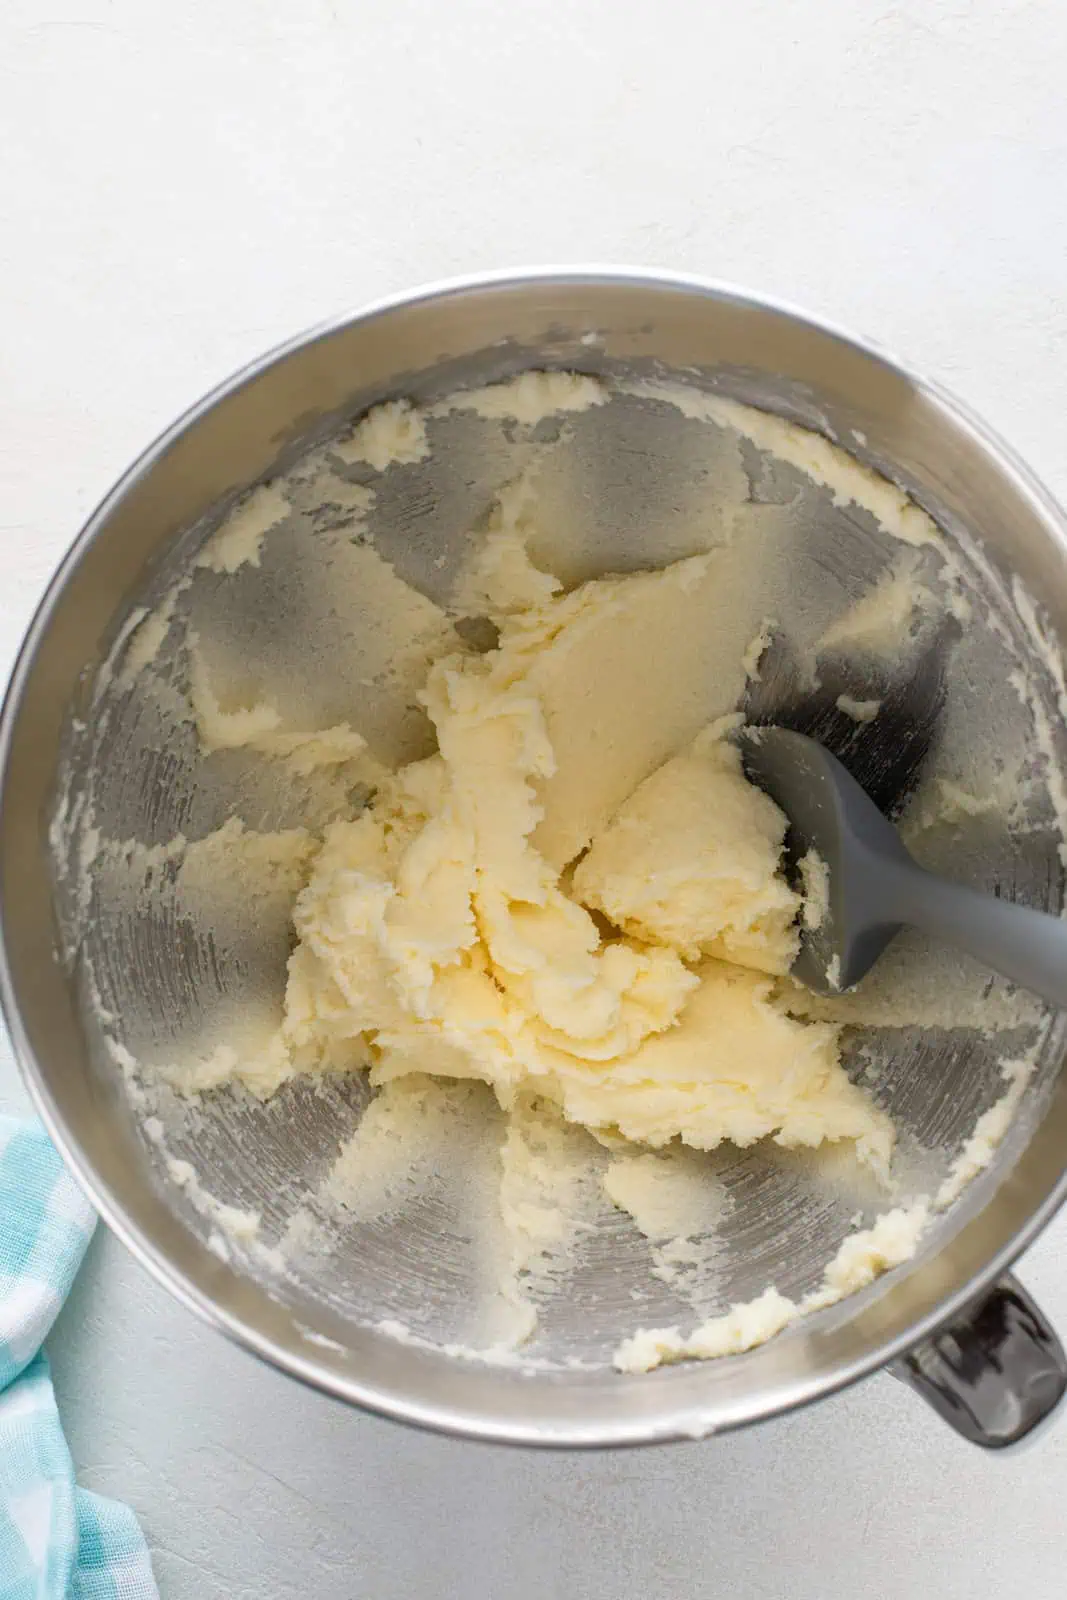 Creamed butter and sugar in a metal bowl.